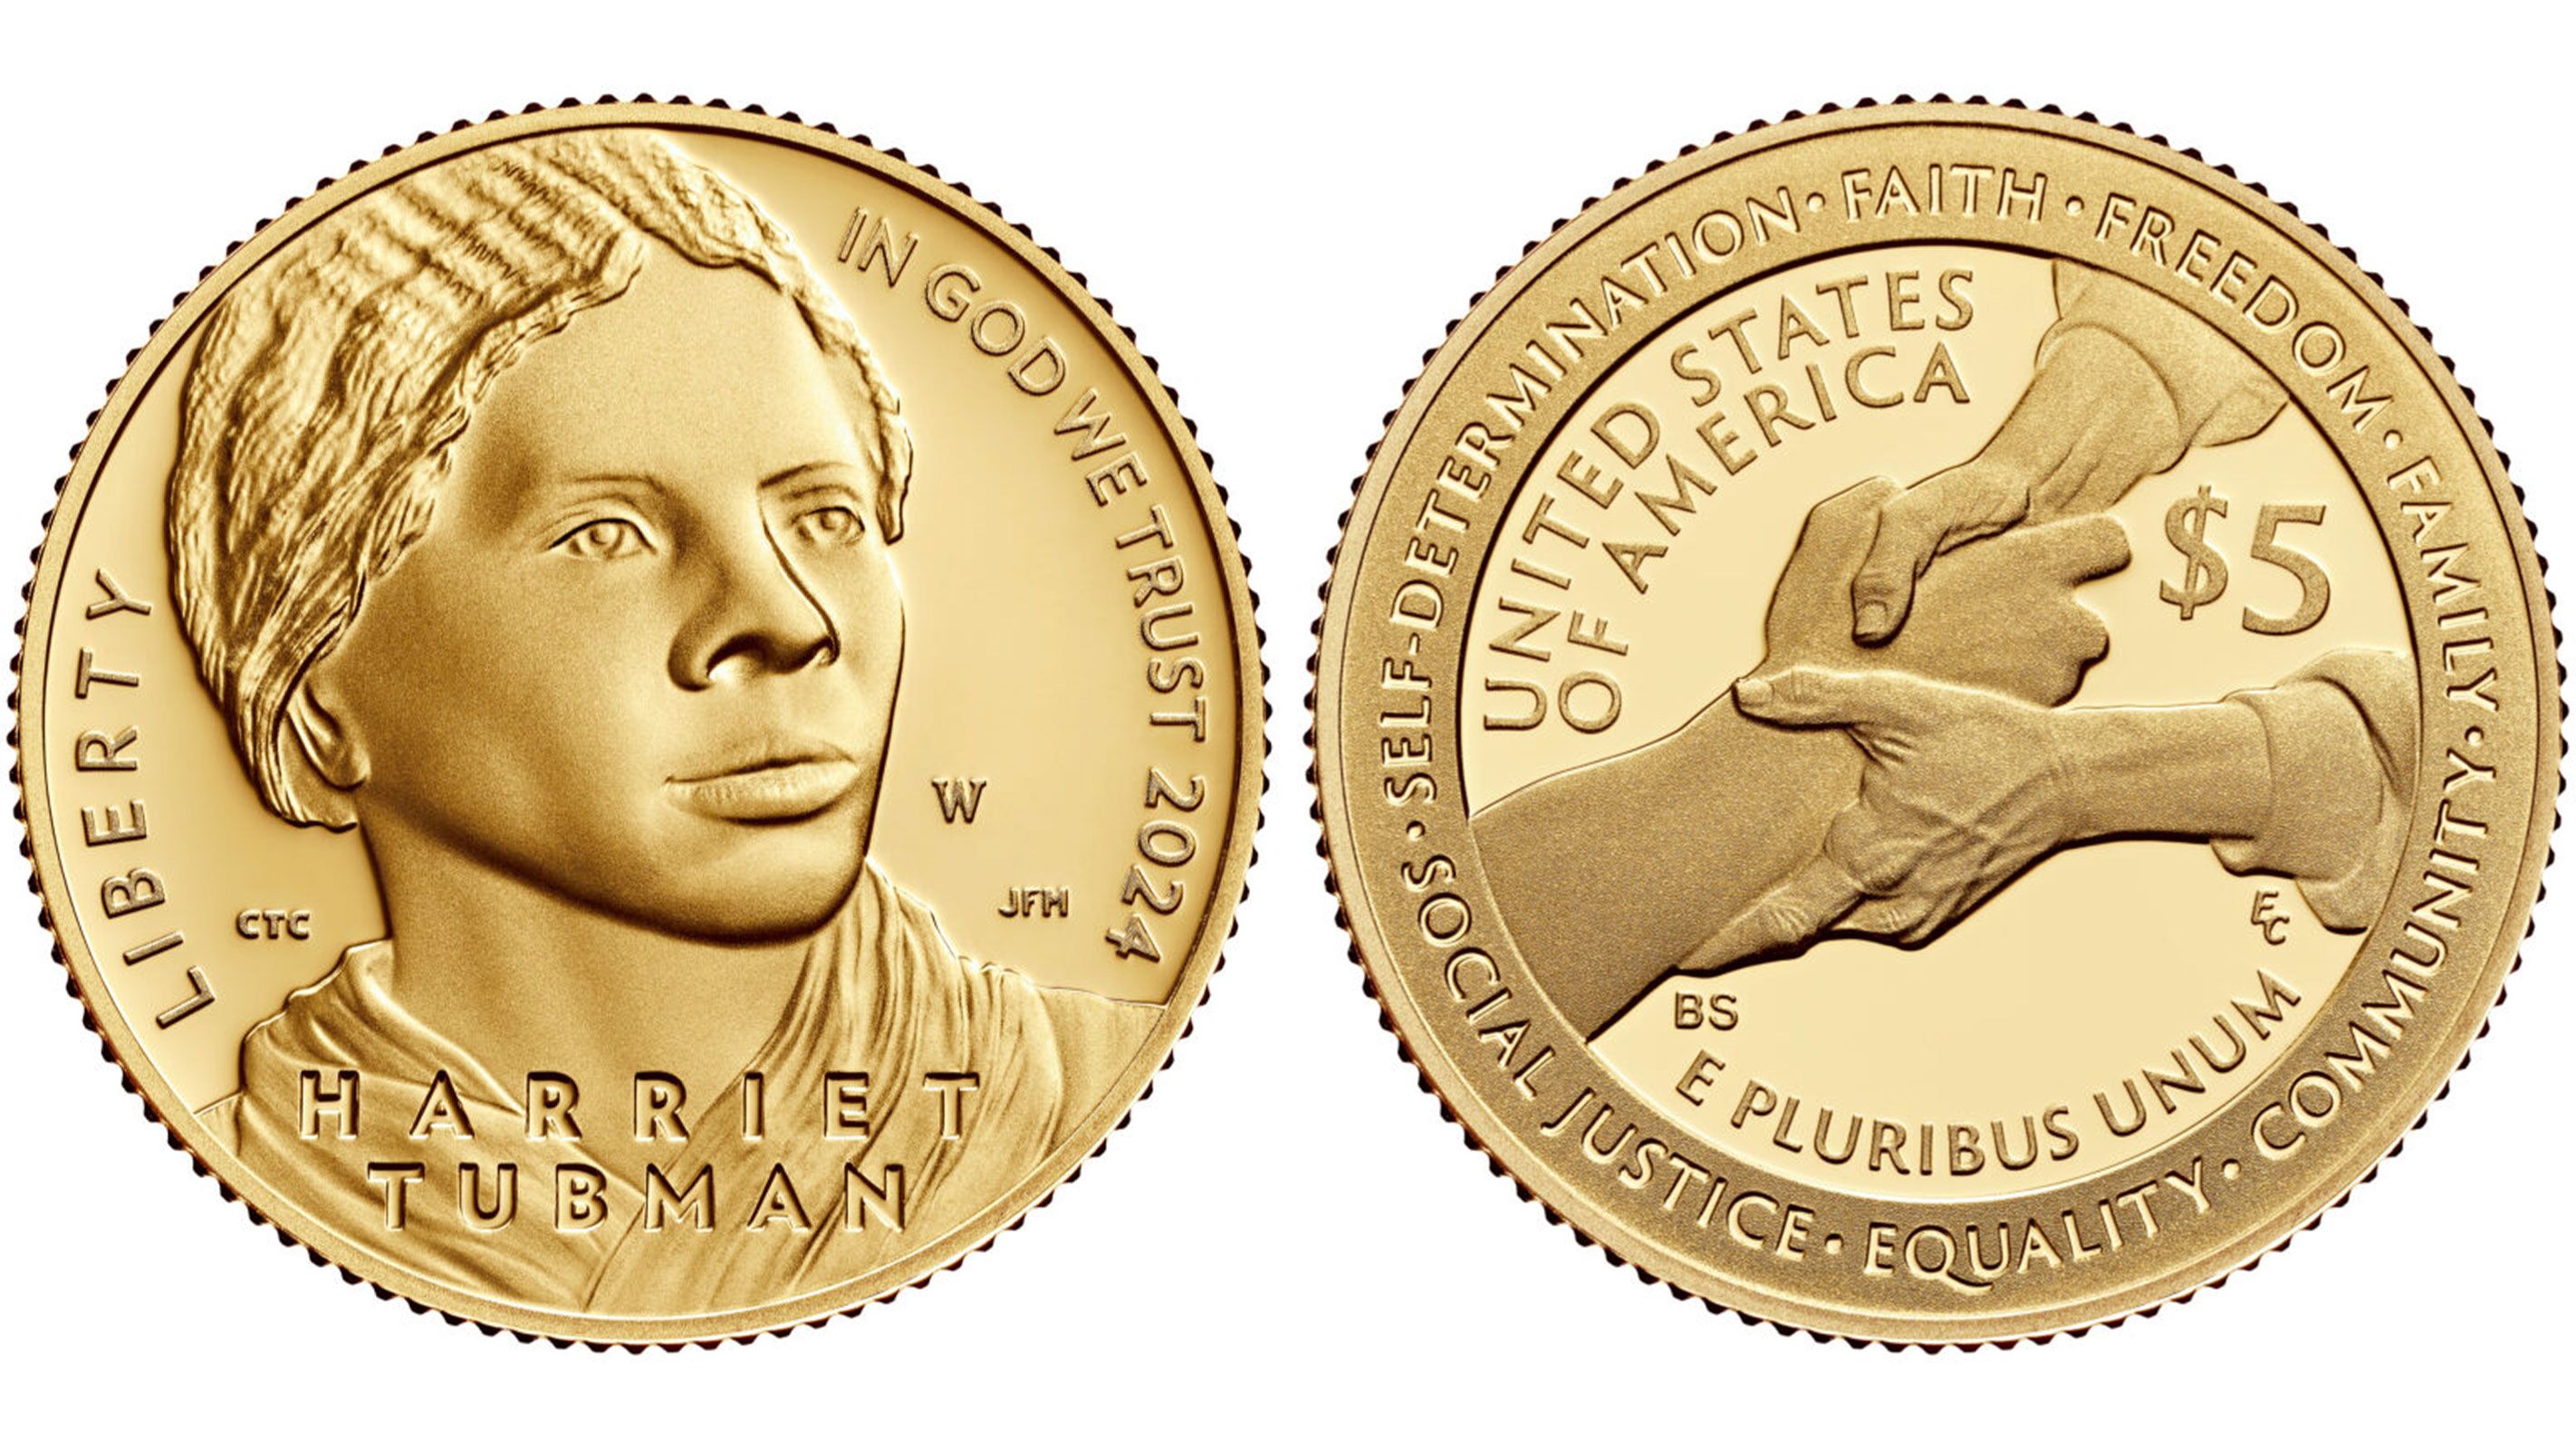 Harriet Tubman coins will go on sale this weekend